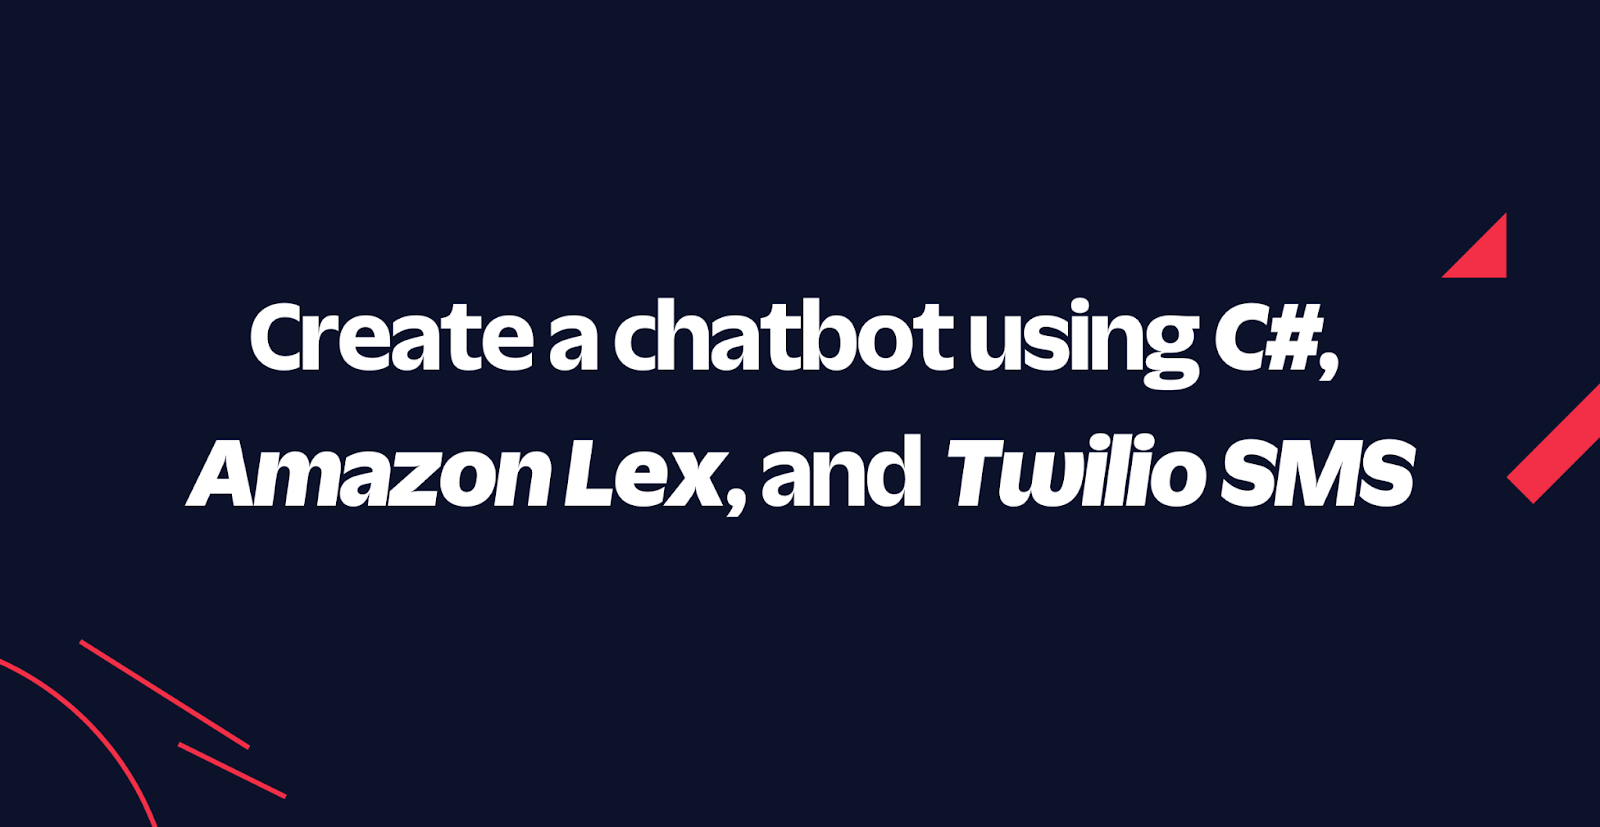 Create a chatbot using C#, Amazon Lex, and Twilio SMS